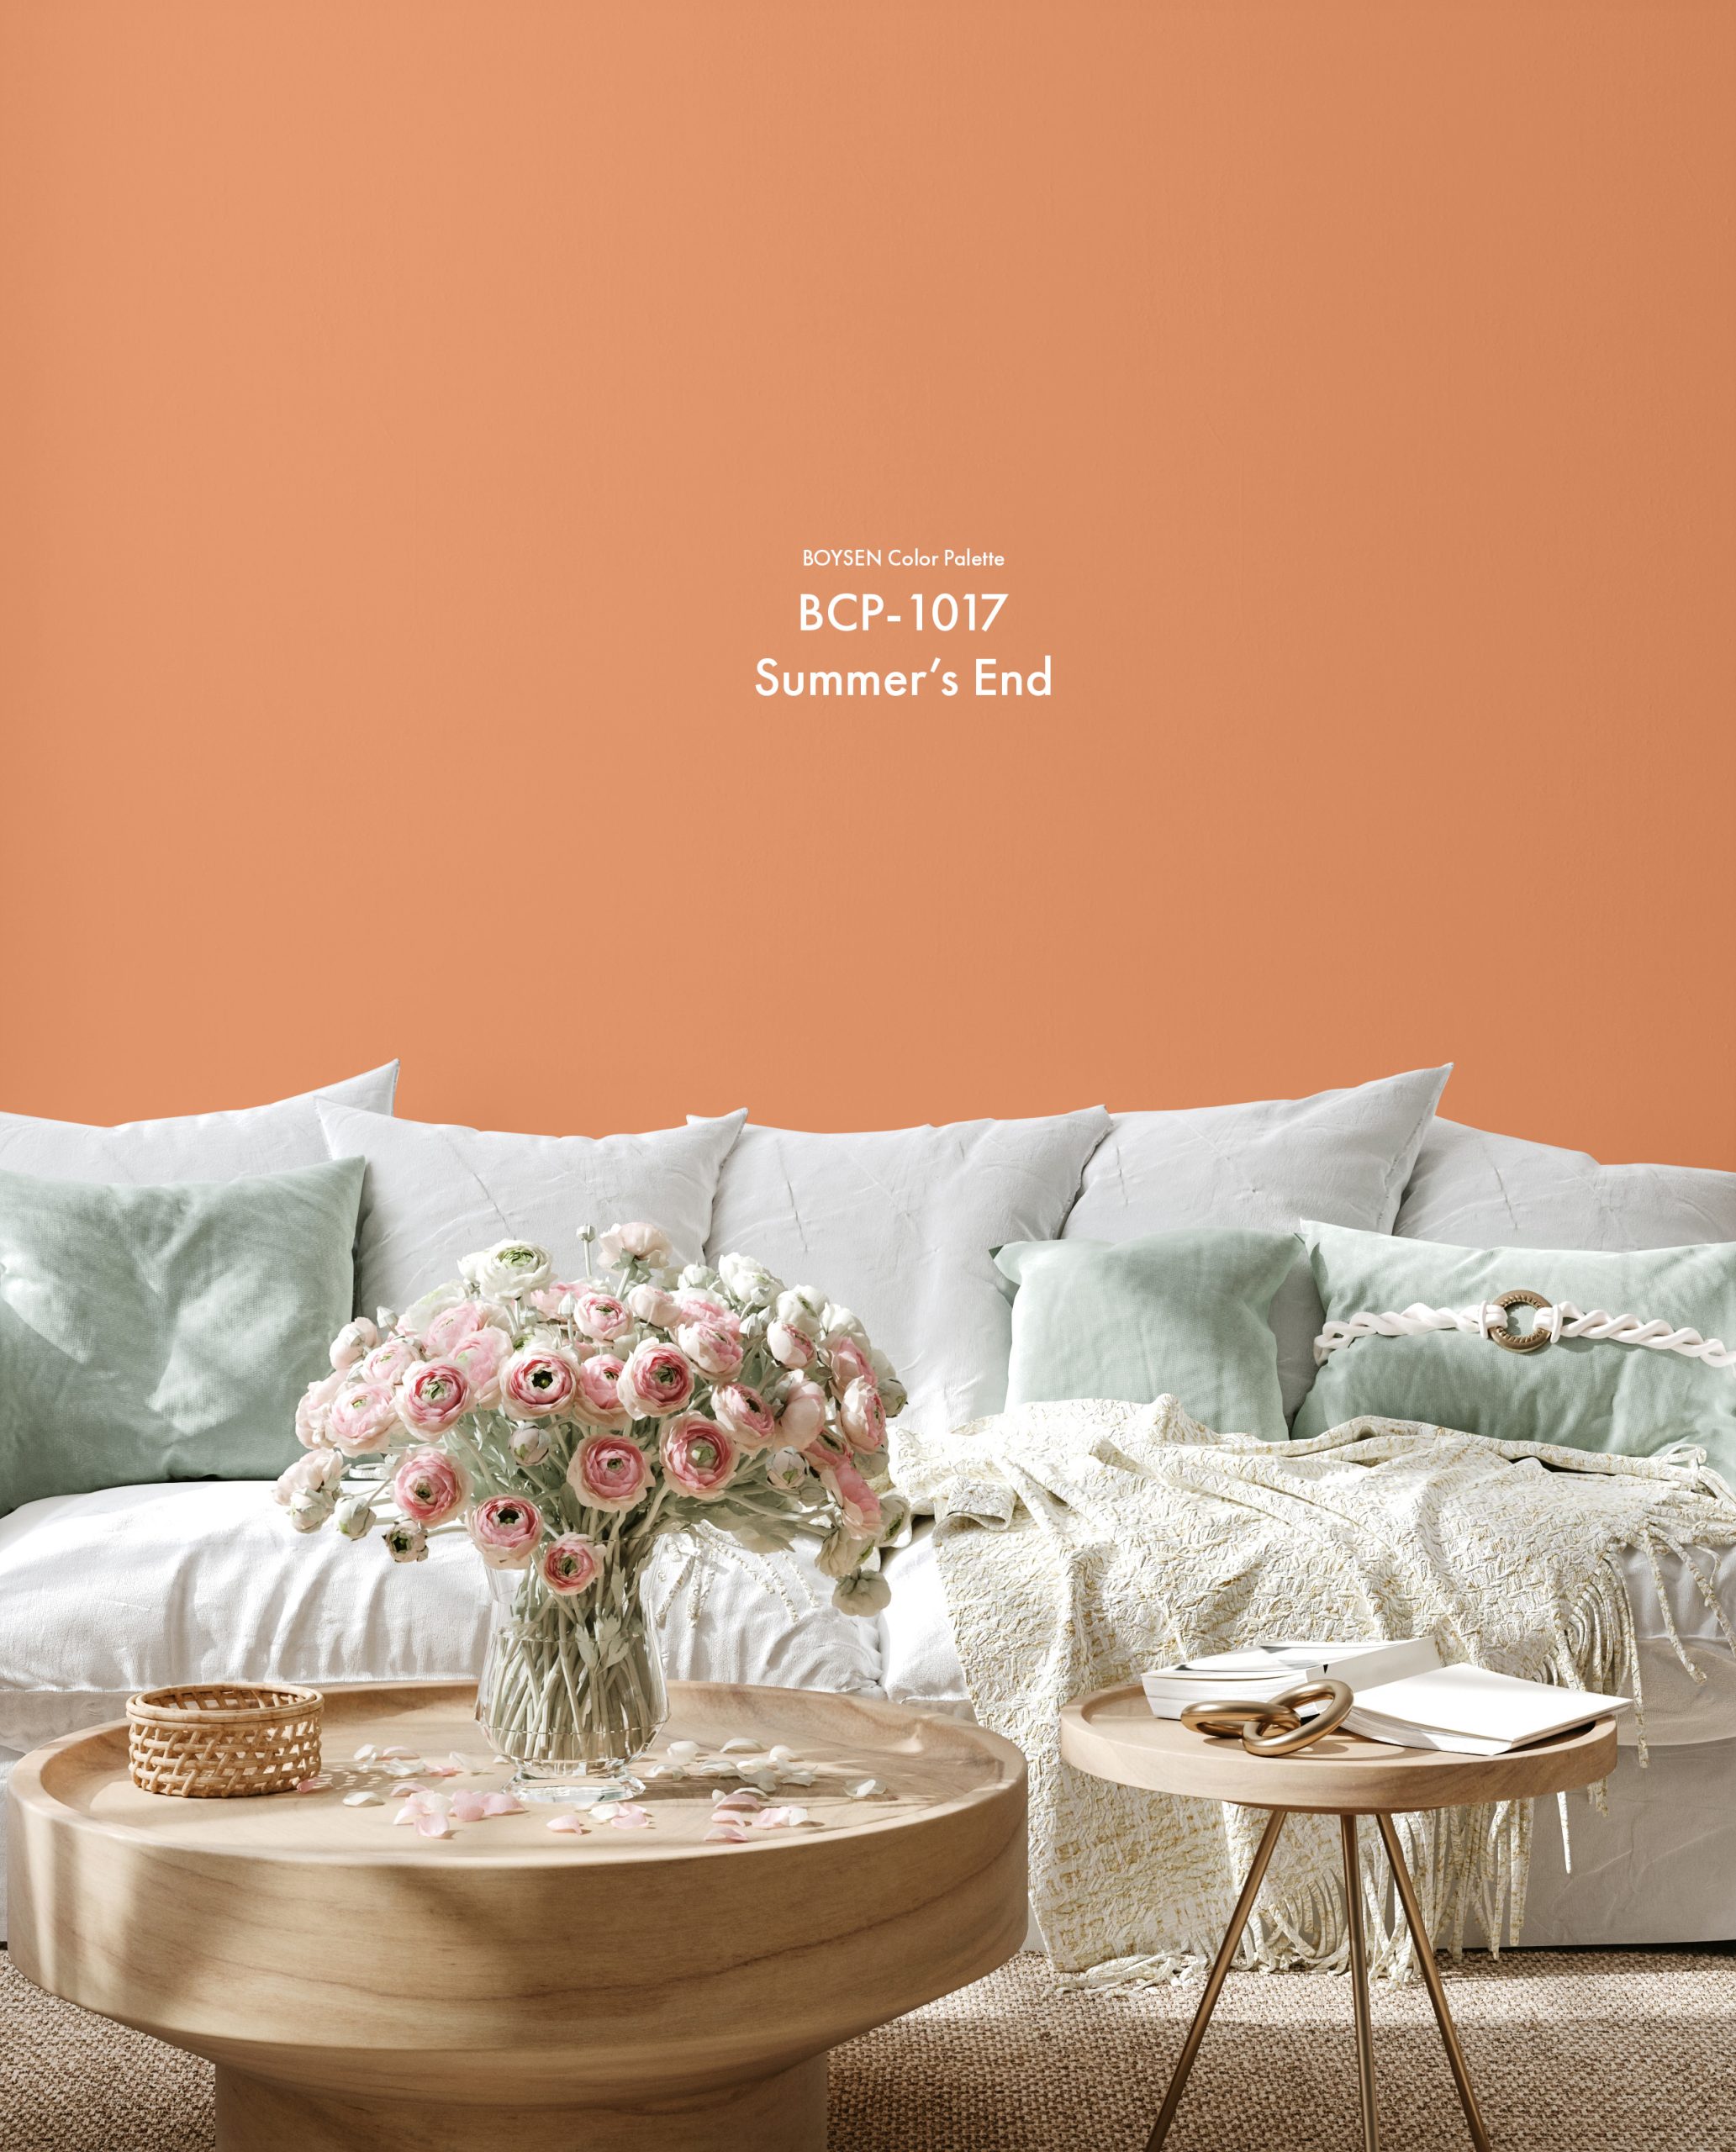 Approachable Accent Colors for Understated but Stylish Spaces | MyBoysen